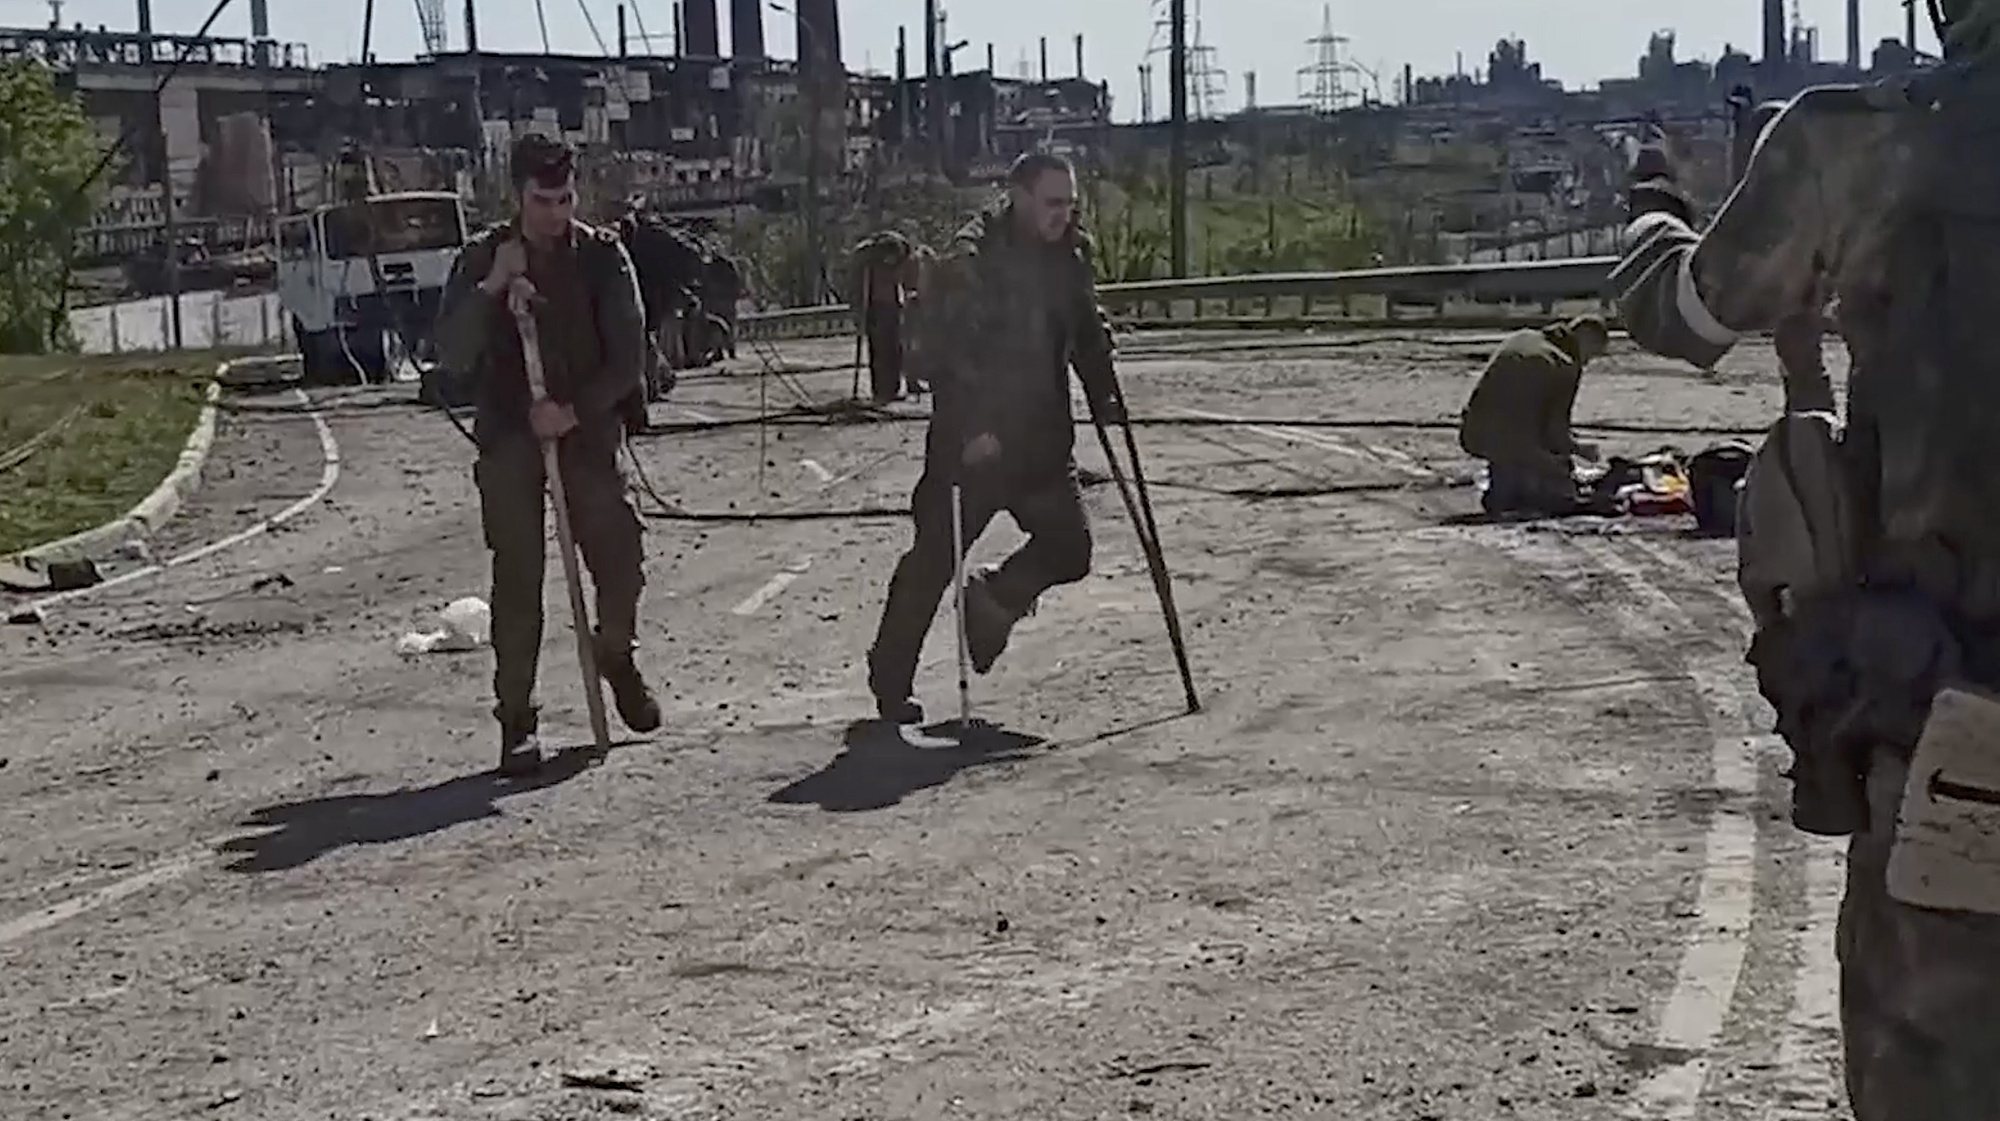 epa09956602 A still image taken from a handout video dated 17 Apirl 2022 and made available by the Russian Defence ministry press service on 18 April 2022 shows Ukrainian servicemen from the besieged Azovstal steel plant preparing to be evacuated, Mariupol, Ukraine, 17 May 2022. A total of 265 Ukrainian militants, including 51 seriously wounded, have laid down arms and surrendered to Russian forces, the Russian Ministry of Defence said on 17 May 2022. Those in need of medical assistance were sent for treatment to a hospital in Novoazovsk, the ministry states further. Russian President Putin on 21 April 2022 ordered his Defence Minister to not storm but to blockade the plant where a number of Ukrainian fighters were holding out. On 24 February, Russian troops invaded Ukrainian territory starting a conflict that has provoked destruction and a humanitarian crisis. According to the UNHCR, more than six million refugees have fled Ukraine, and a further 7.7 million people have been displaced internally within Ukraine since.  EPA/RUSSIAN DEFENCE MINISTRY PRESS SERVICE/HANDOUT HANDOUT HANDOUT EDITORIAL USE ONLY/NO SALES HANDOUT EDITORIAL USE ONLY/NO SALES